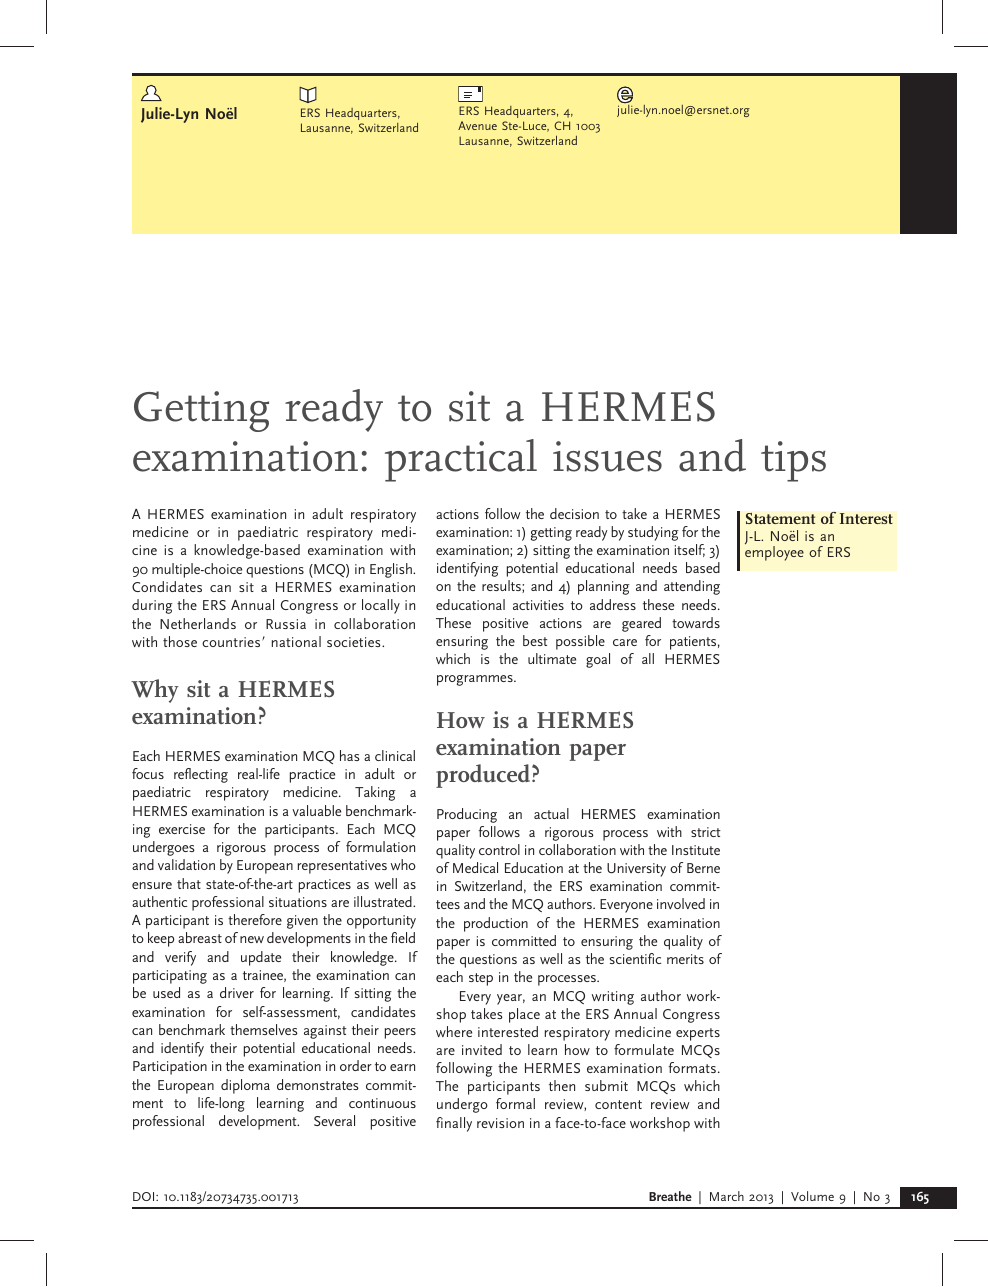 Getting ready to sit a HERMES examination: practical issues and tips –  topic of research paper in Veterinary science. Download scholarly article  PDF and read for free on CyberLeninka open science hub.